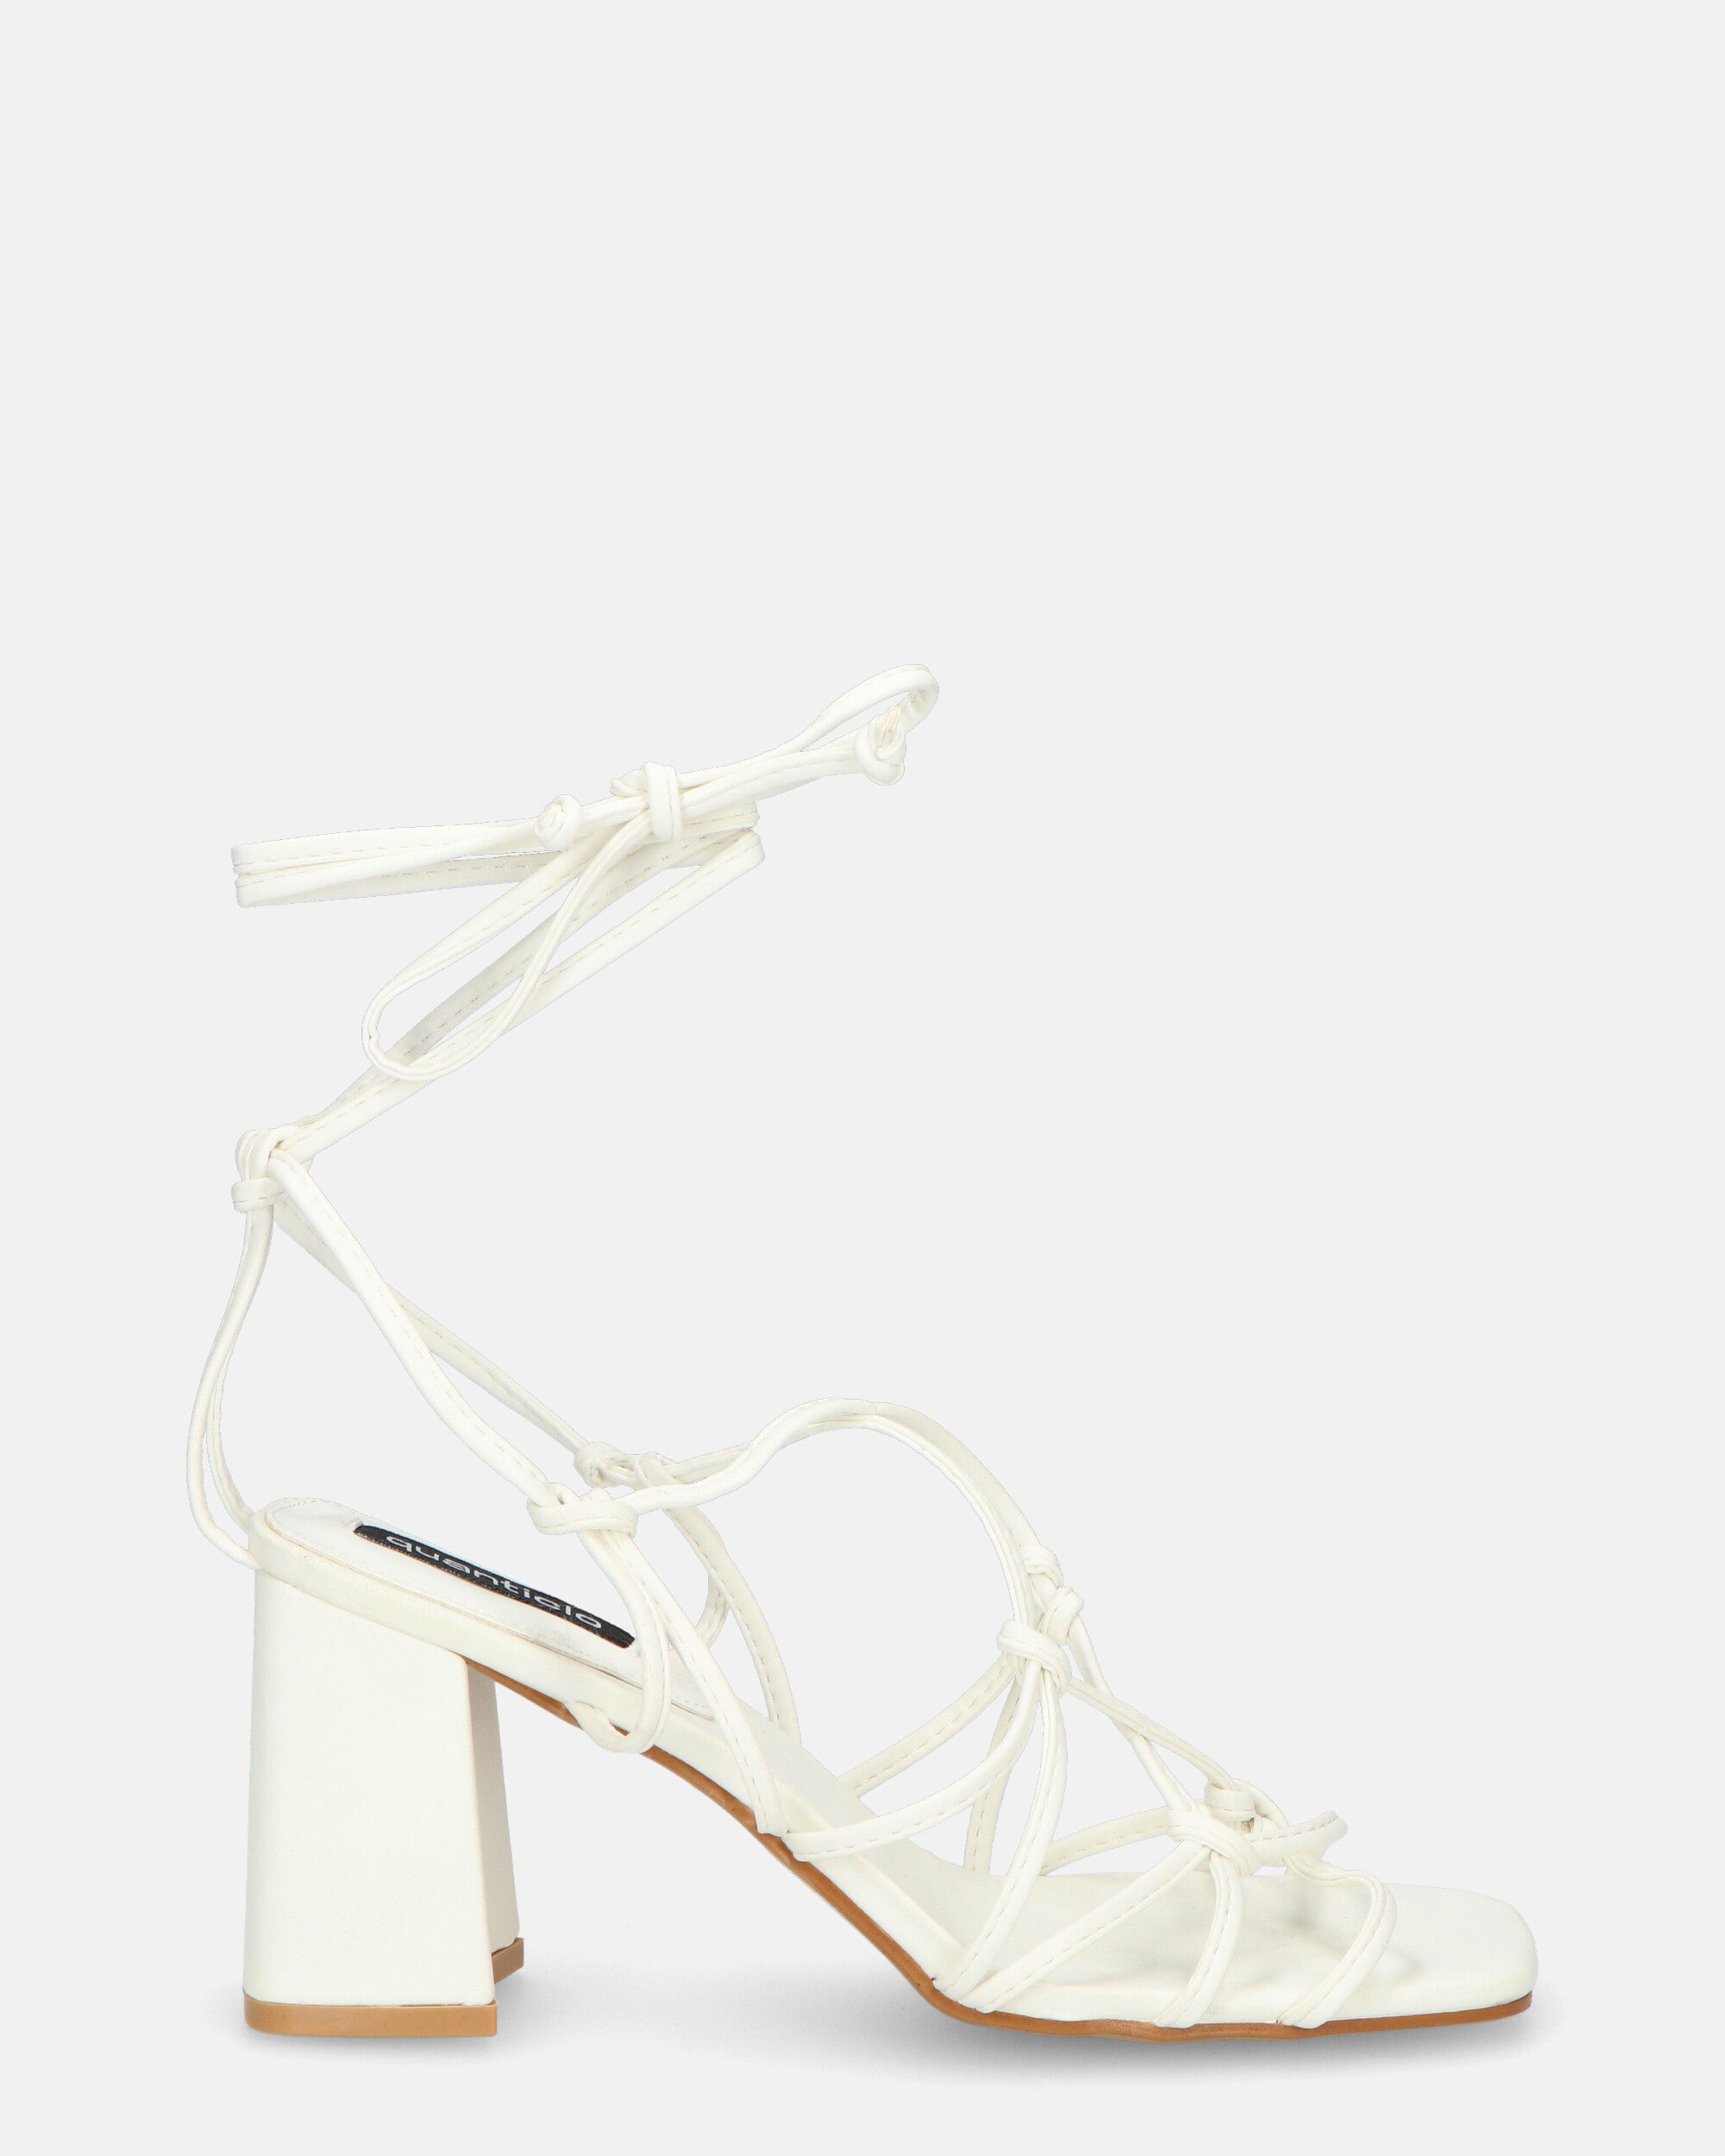 KAYLEE - white sandals with faux leather laces